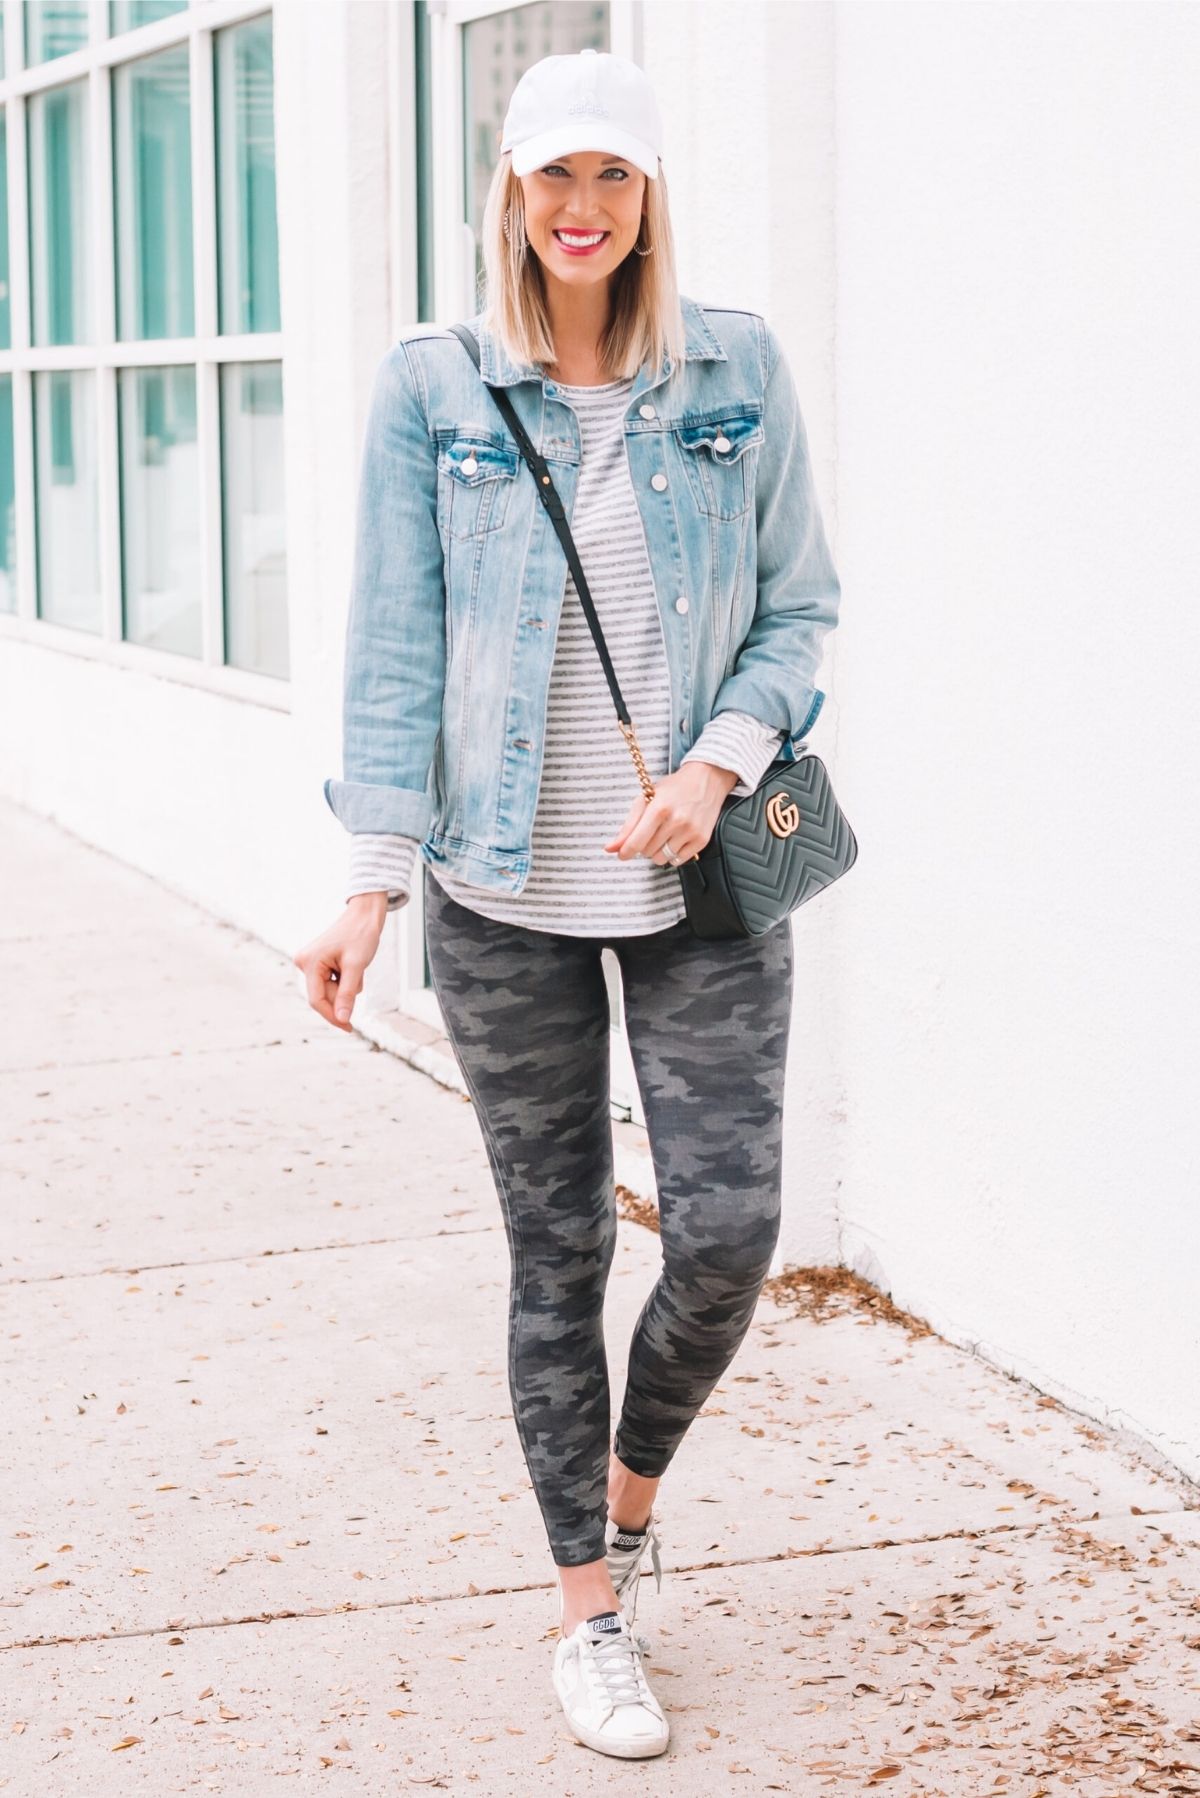 style camo pants with a jean jacket